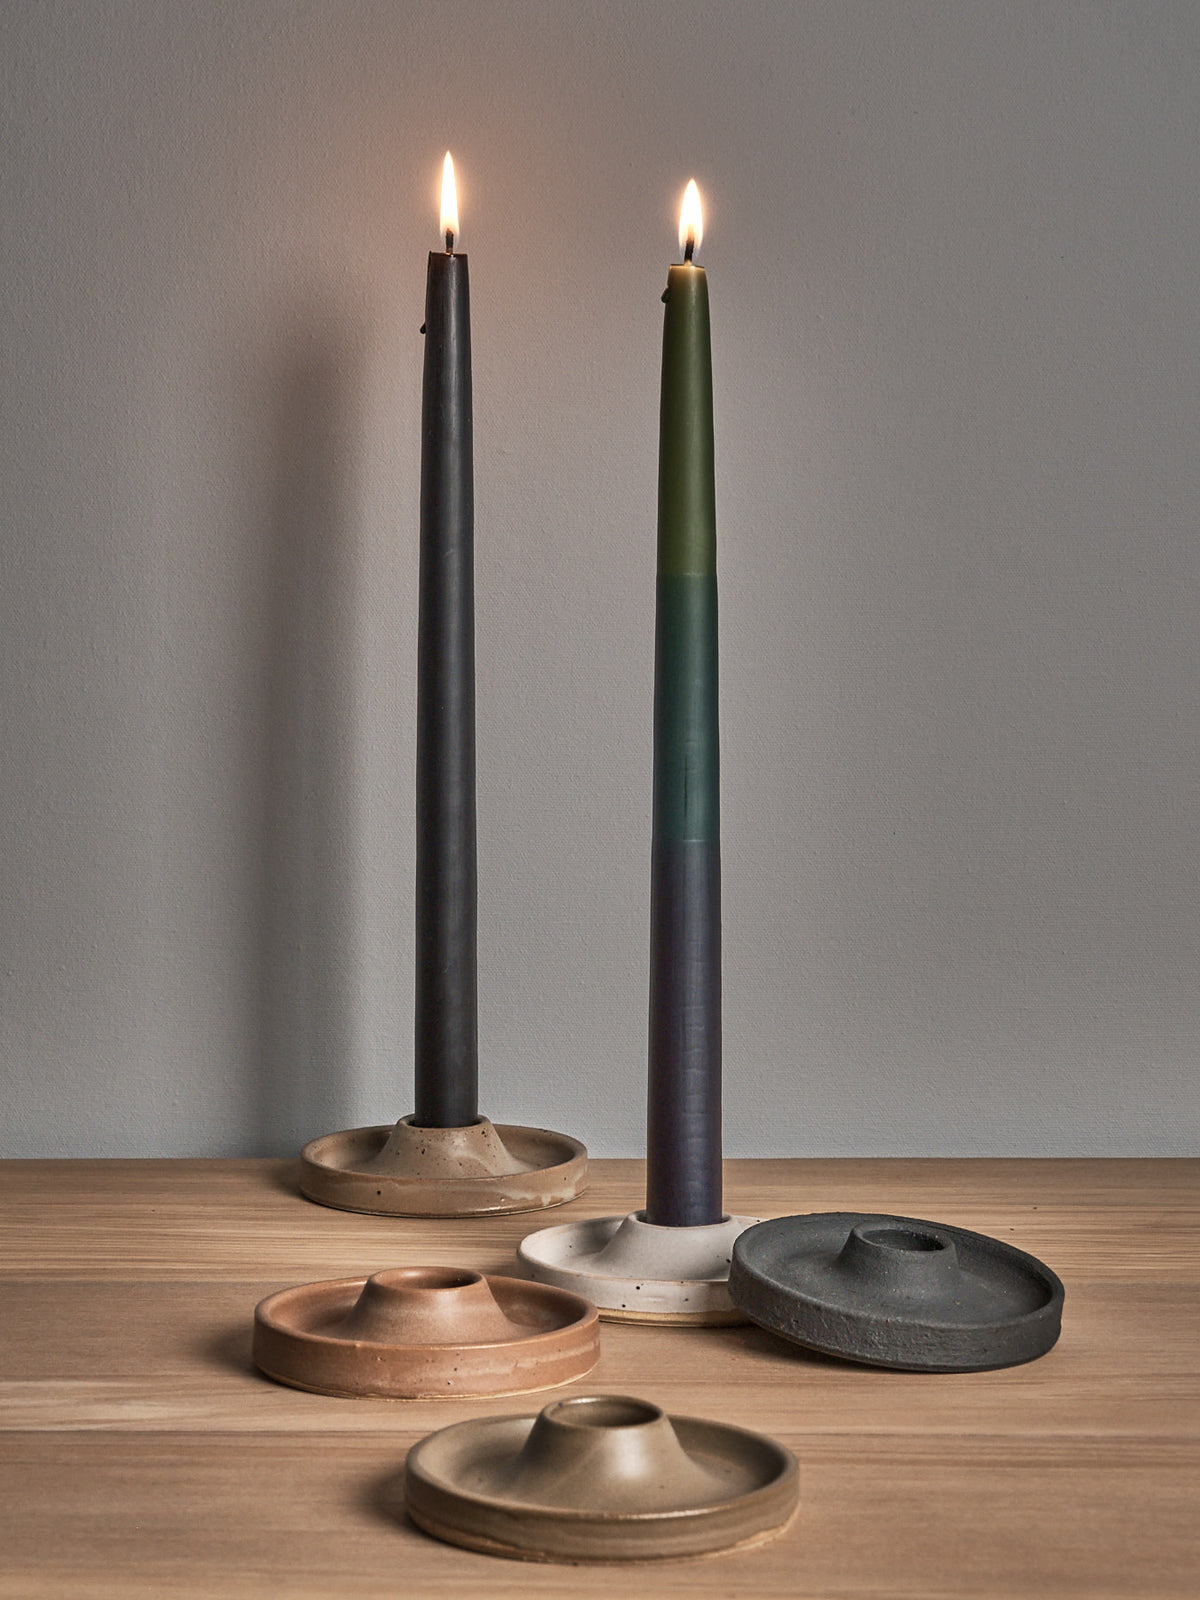 Three deborah sweeney Candle Holder – Clouds on a wooden table next to each other.